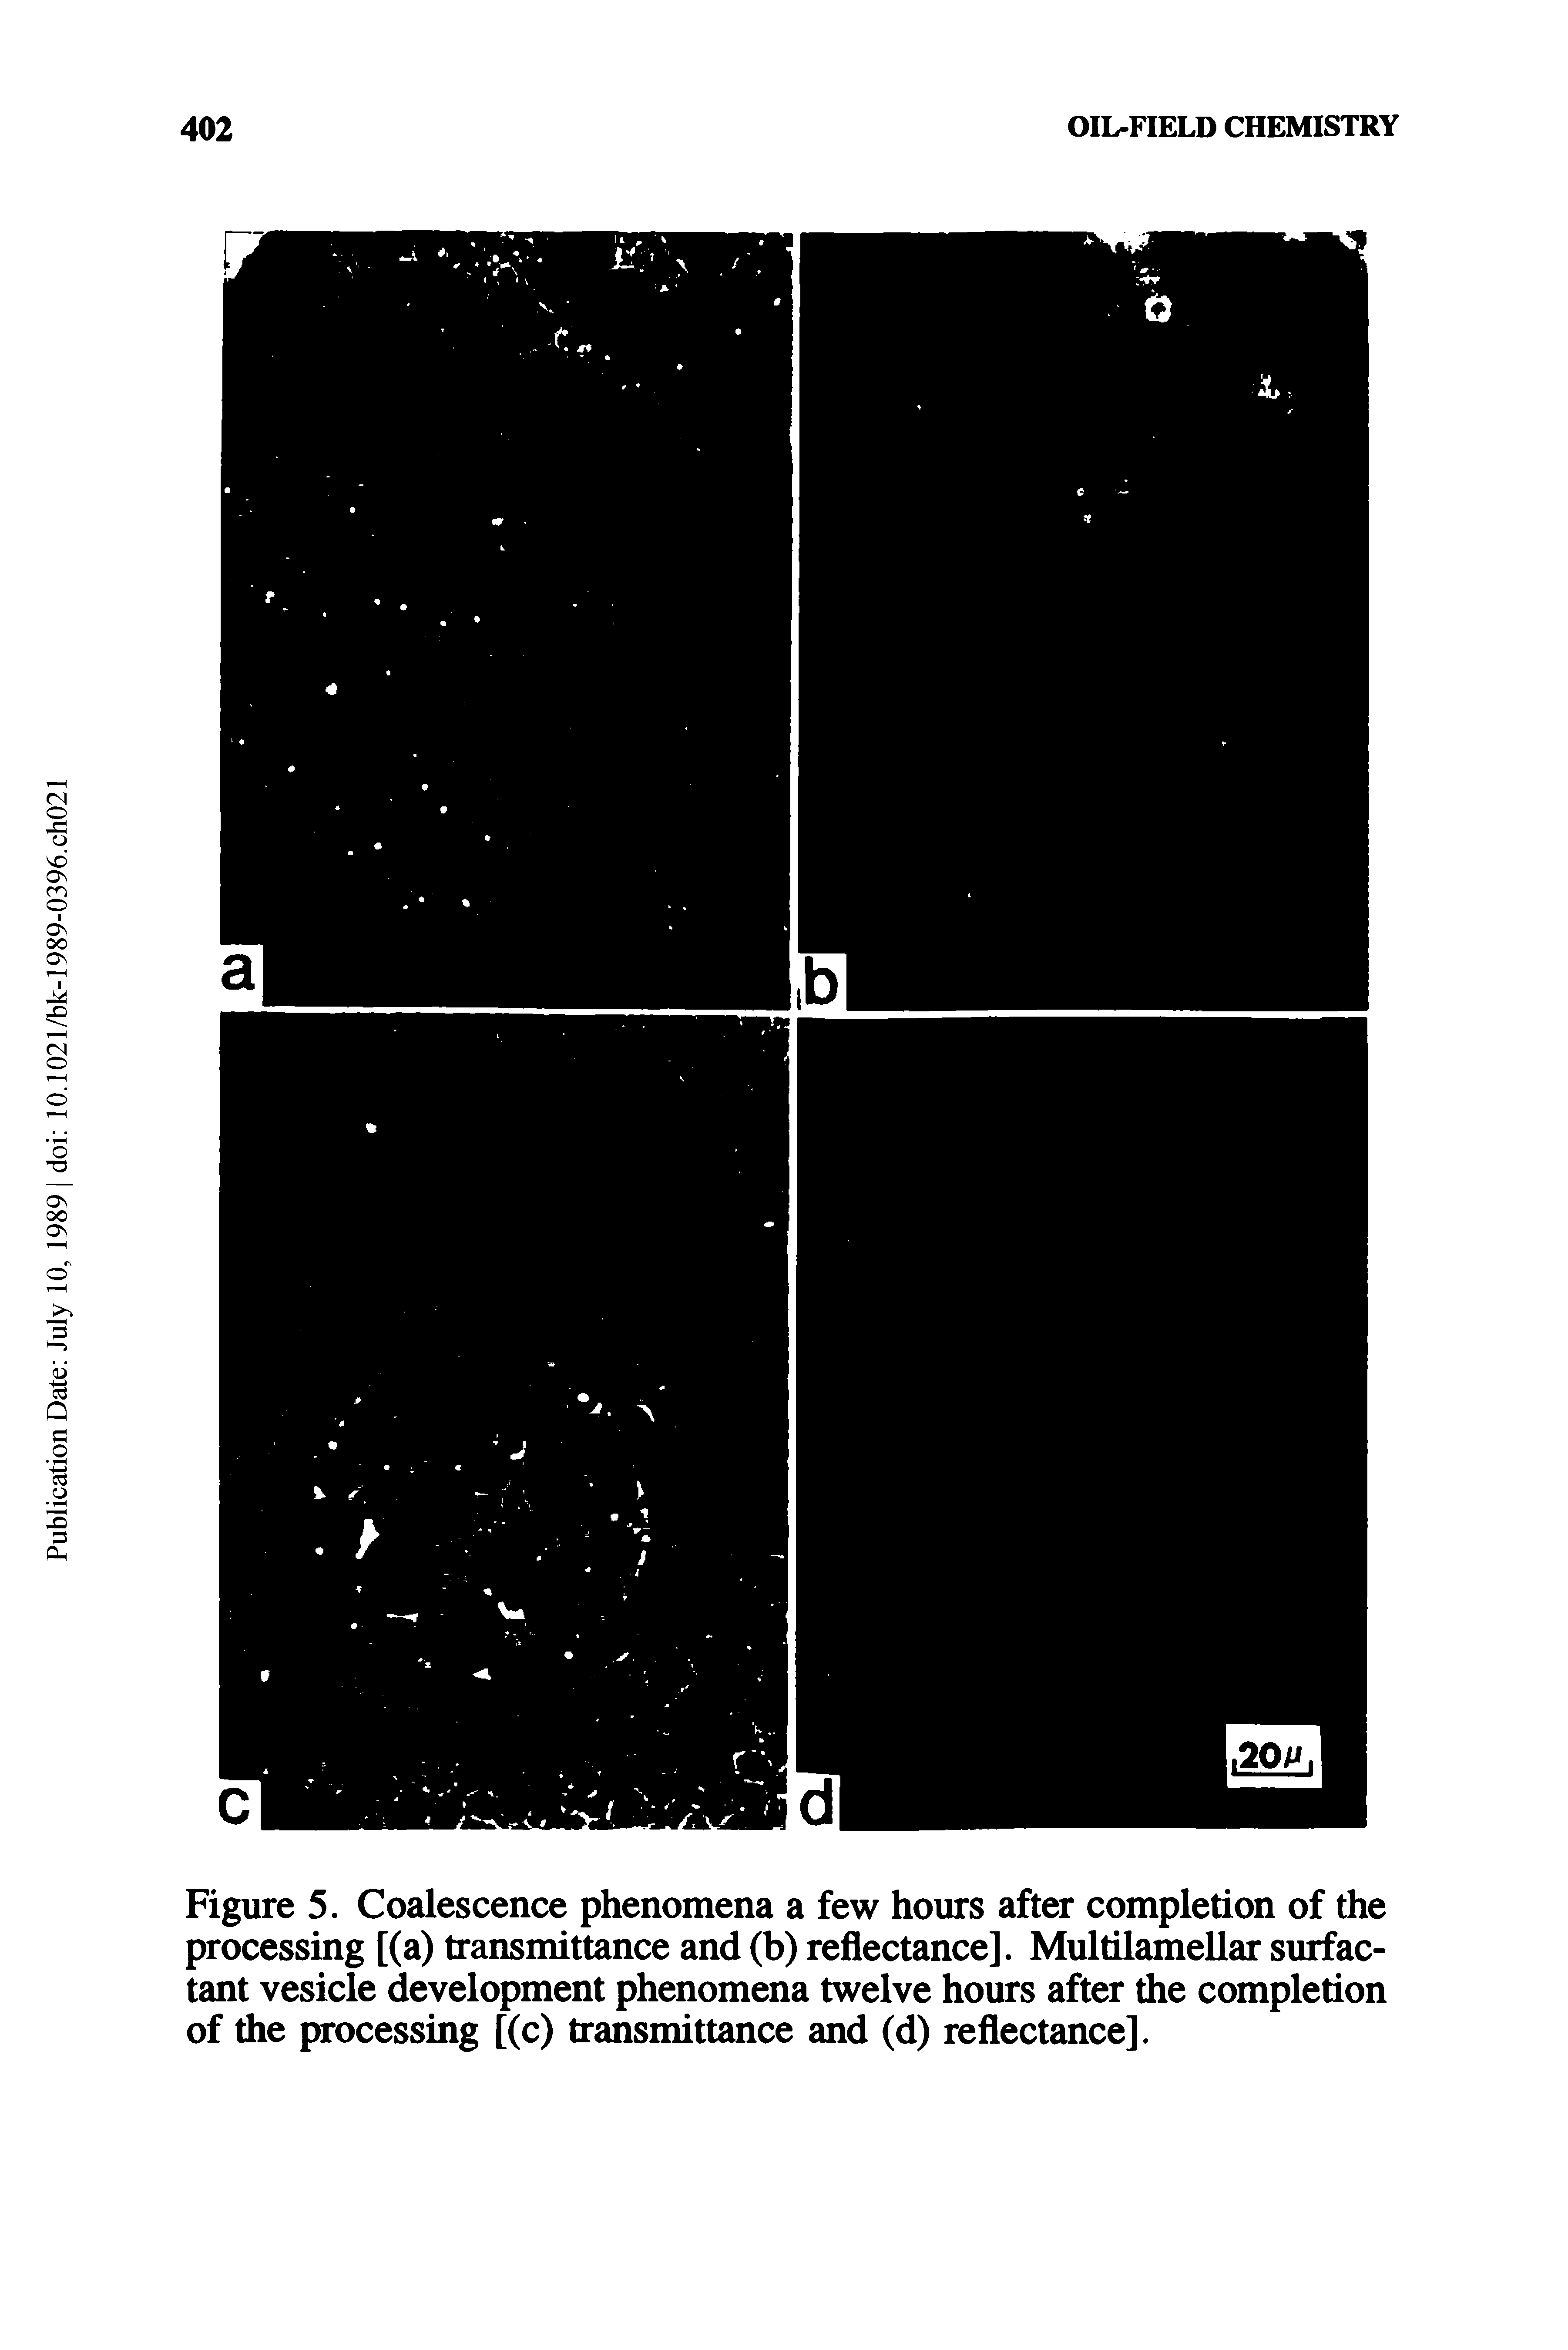 Figure 5. Coalescence phenomena a few hours after completion of the processing [(a) transmittance and (b) reflectance]. Multilamellar surfactant vesicle development phenomena twelve hours after the completion of the processing [(c) transmittance and (d) reflectance].